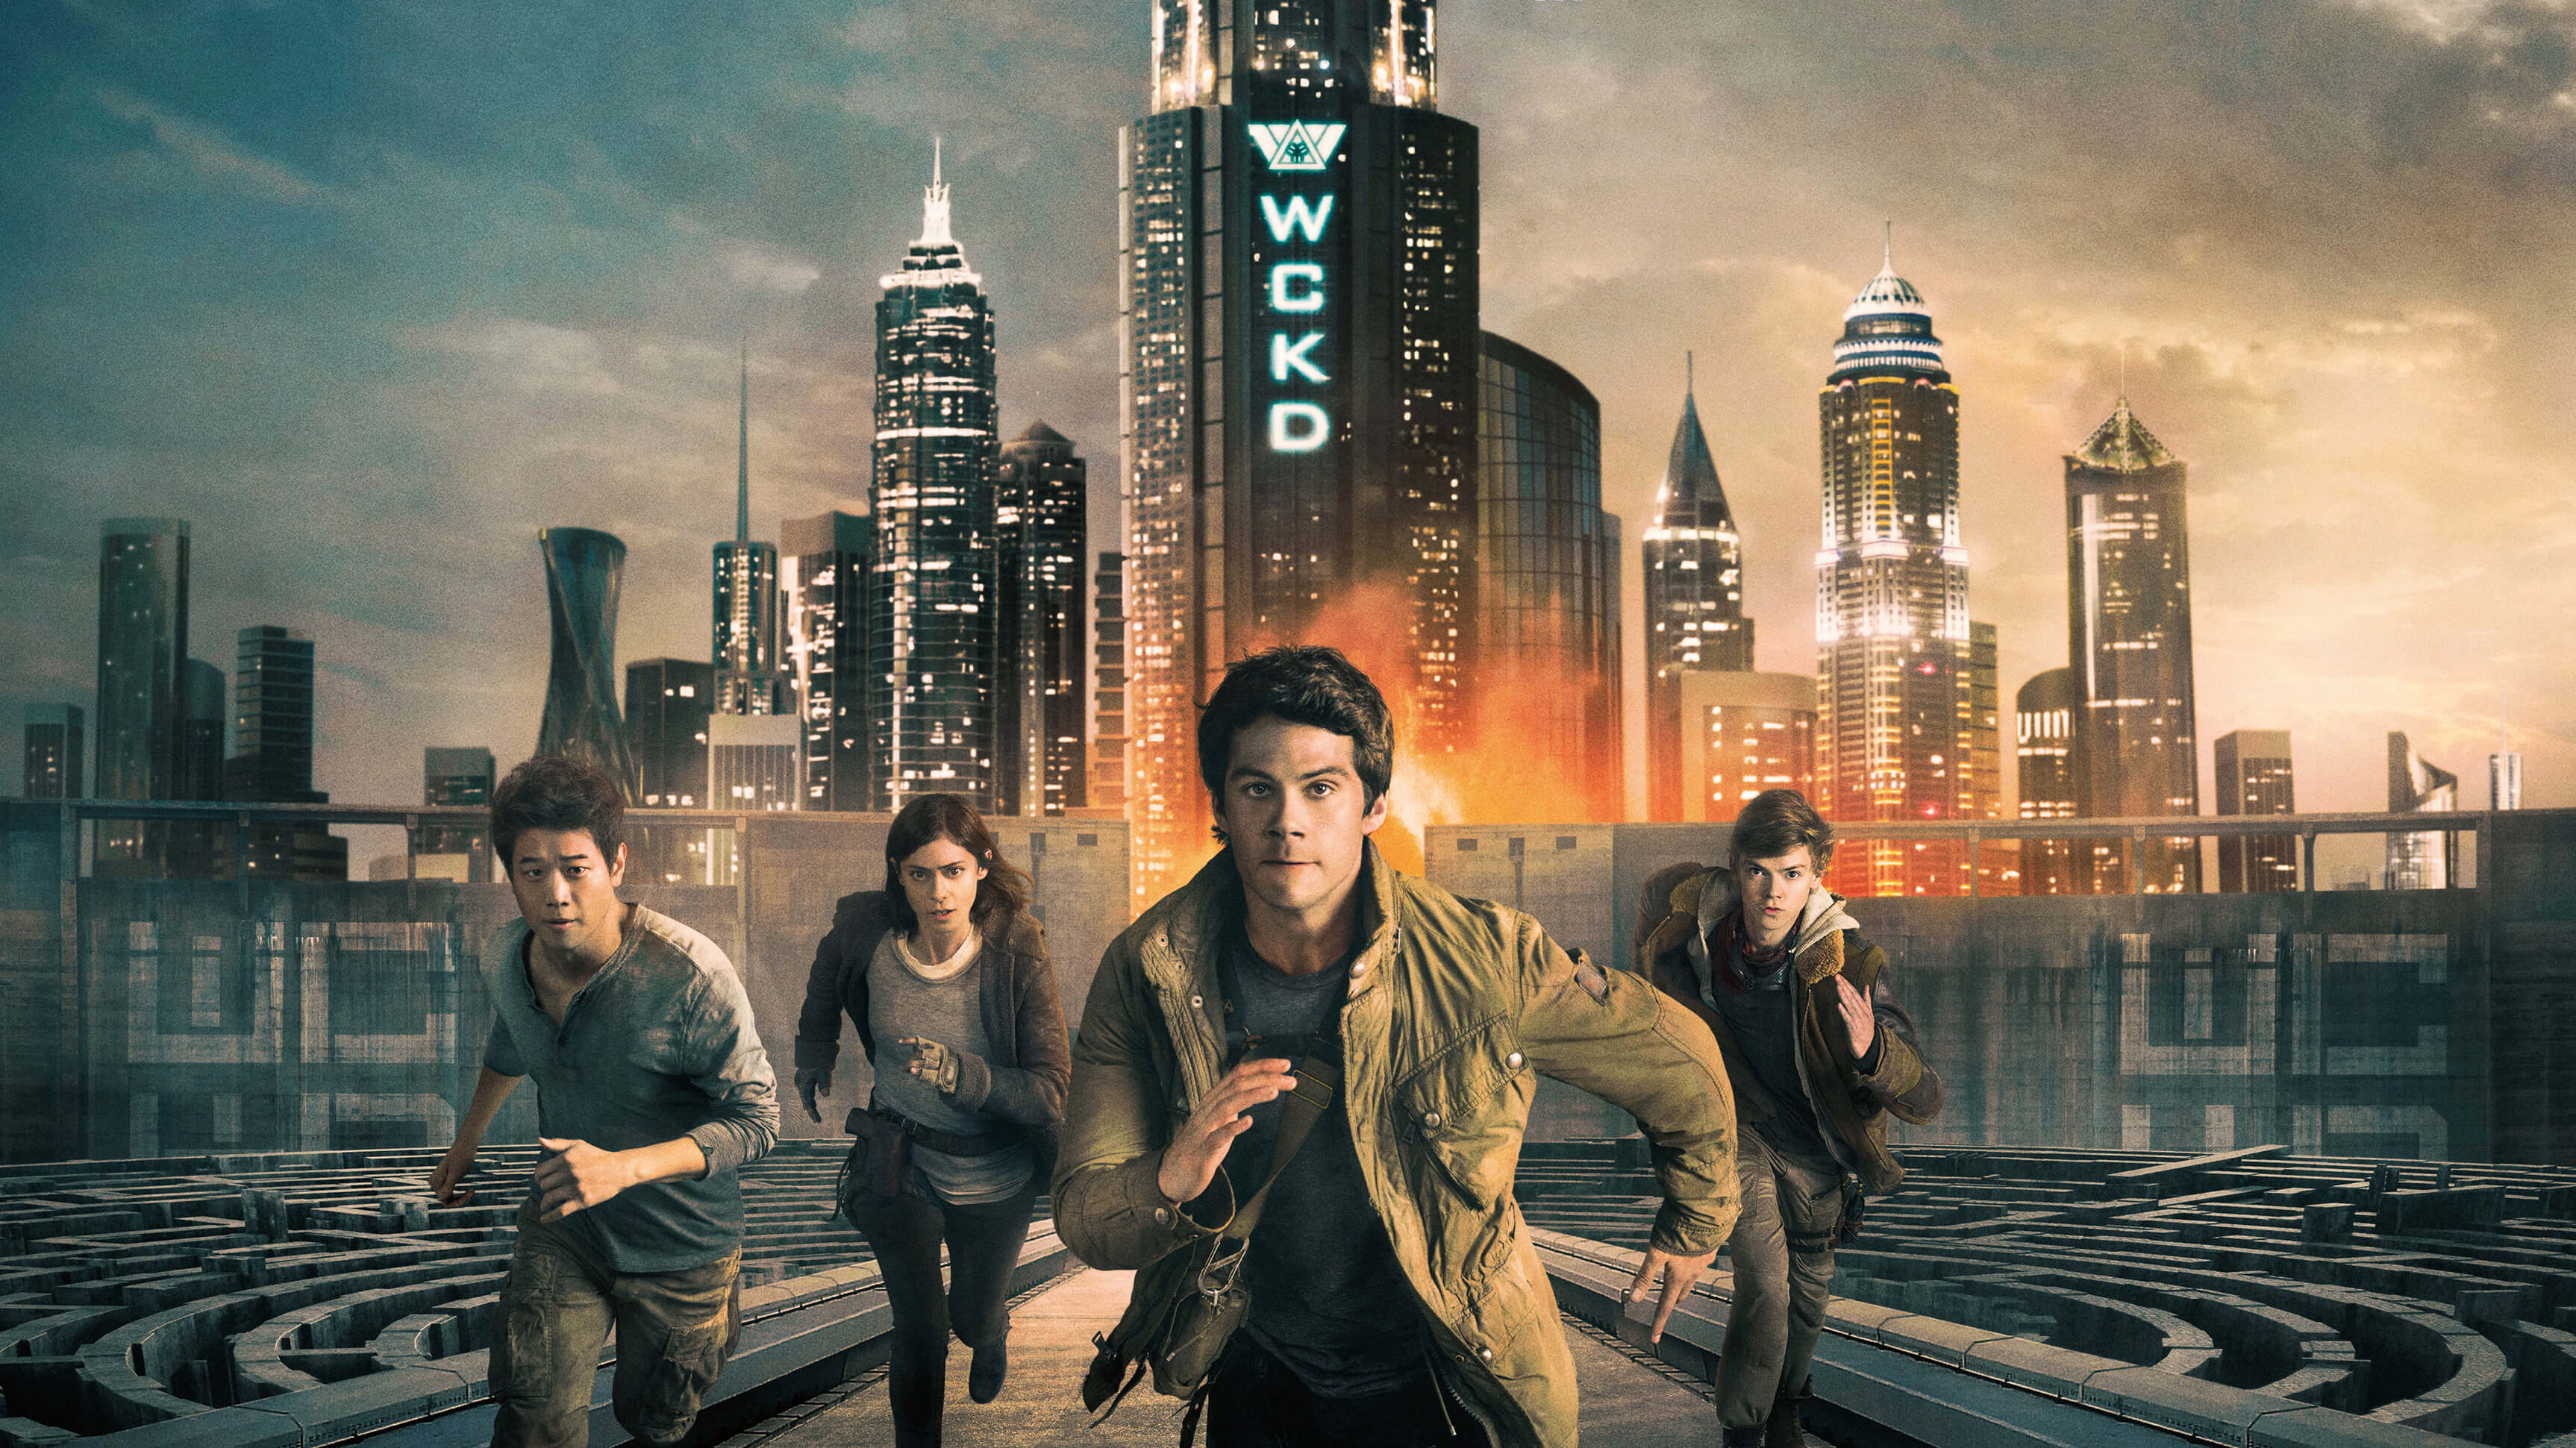 Maze Runner The Death Cure Wallpaper Background HD 63375 3452x1941px